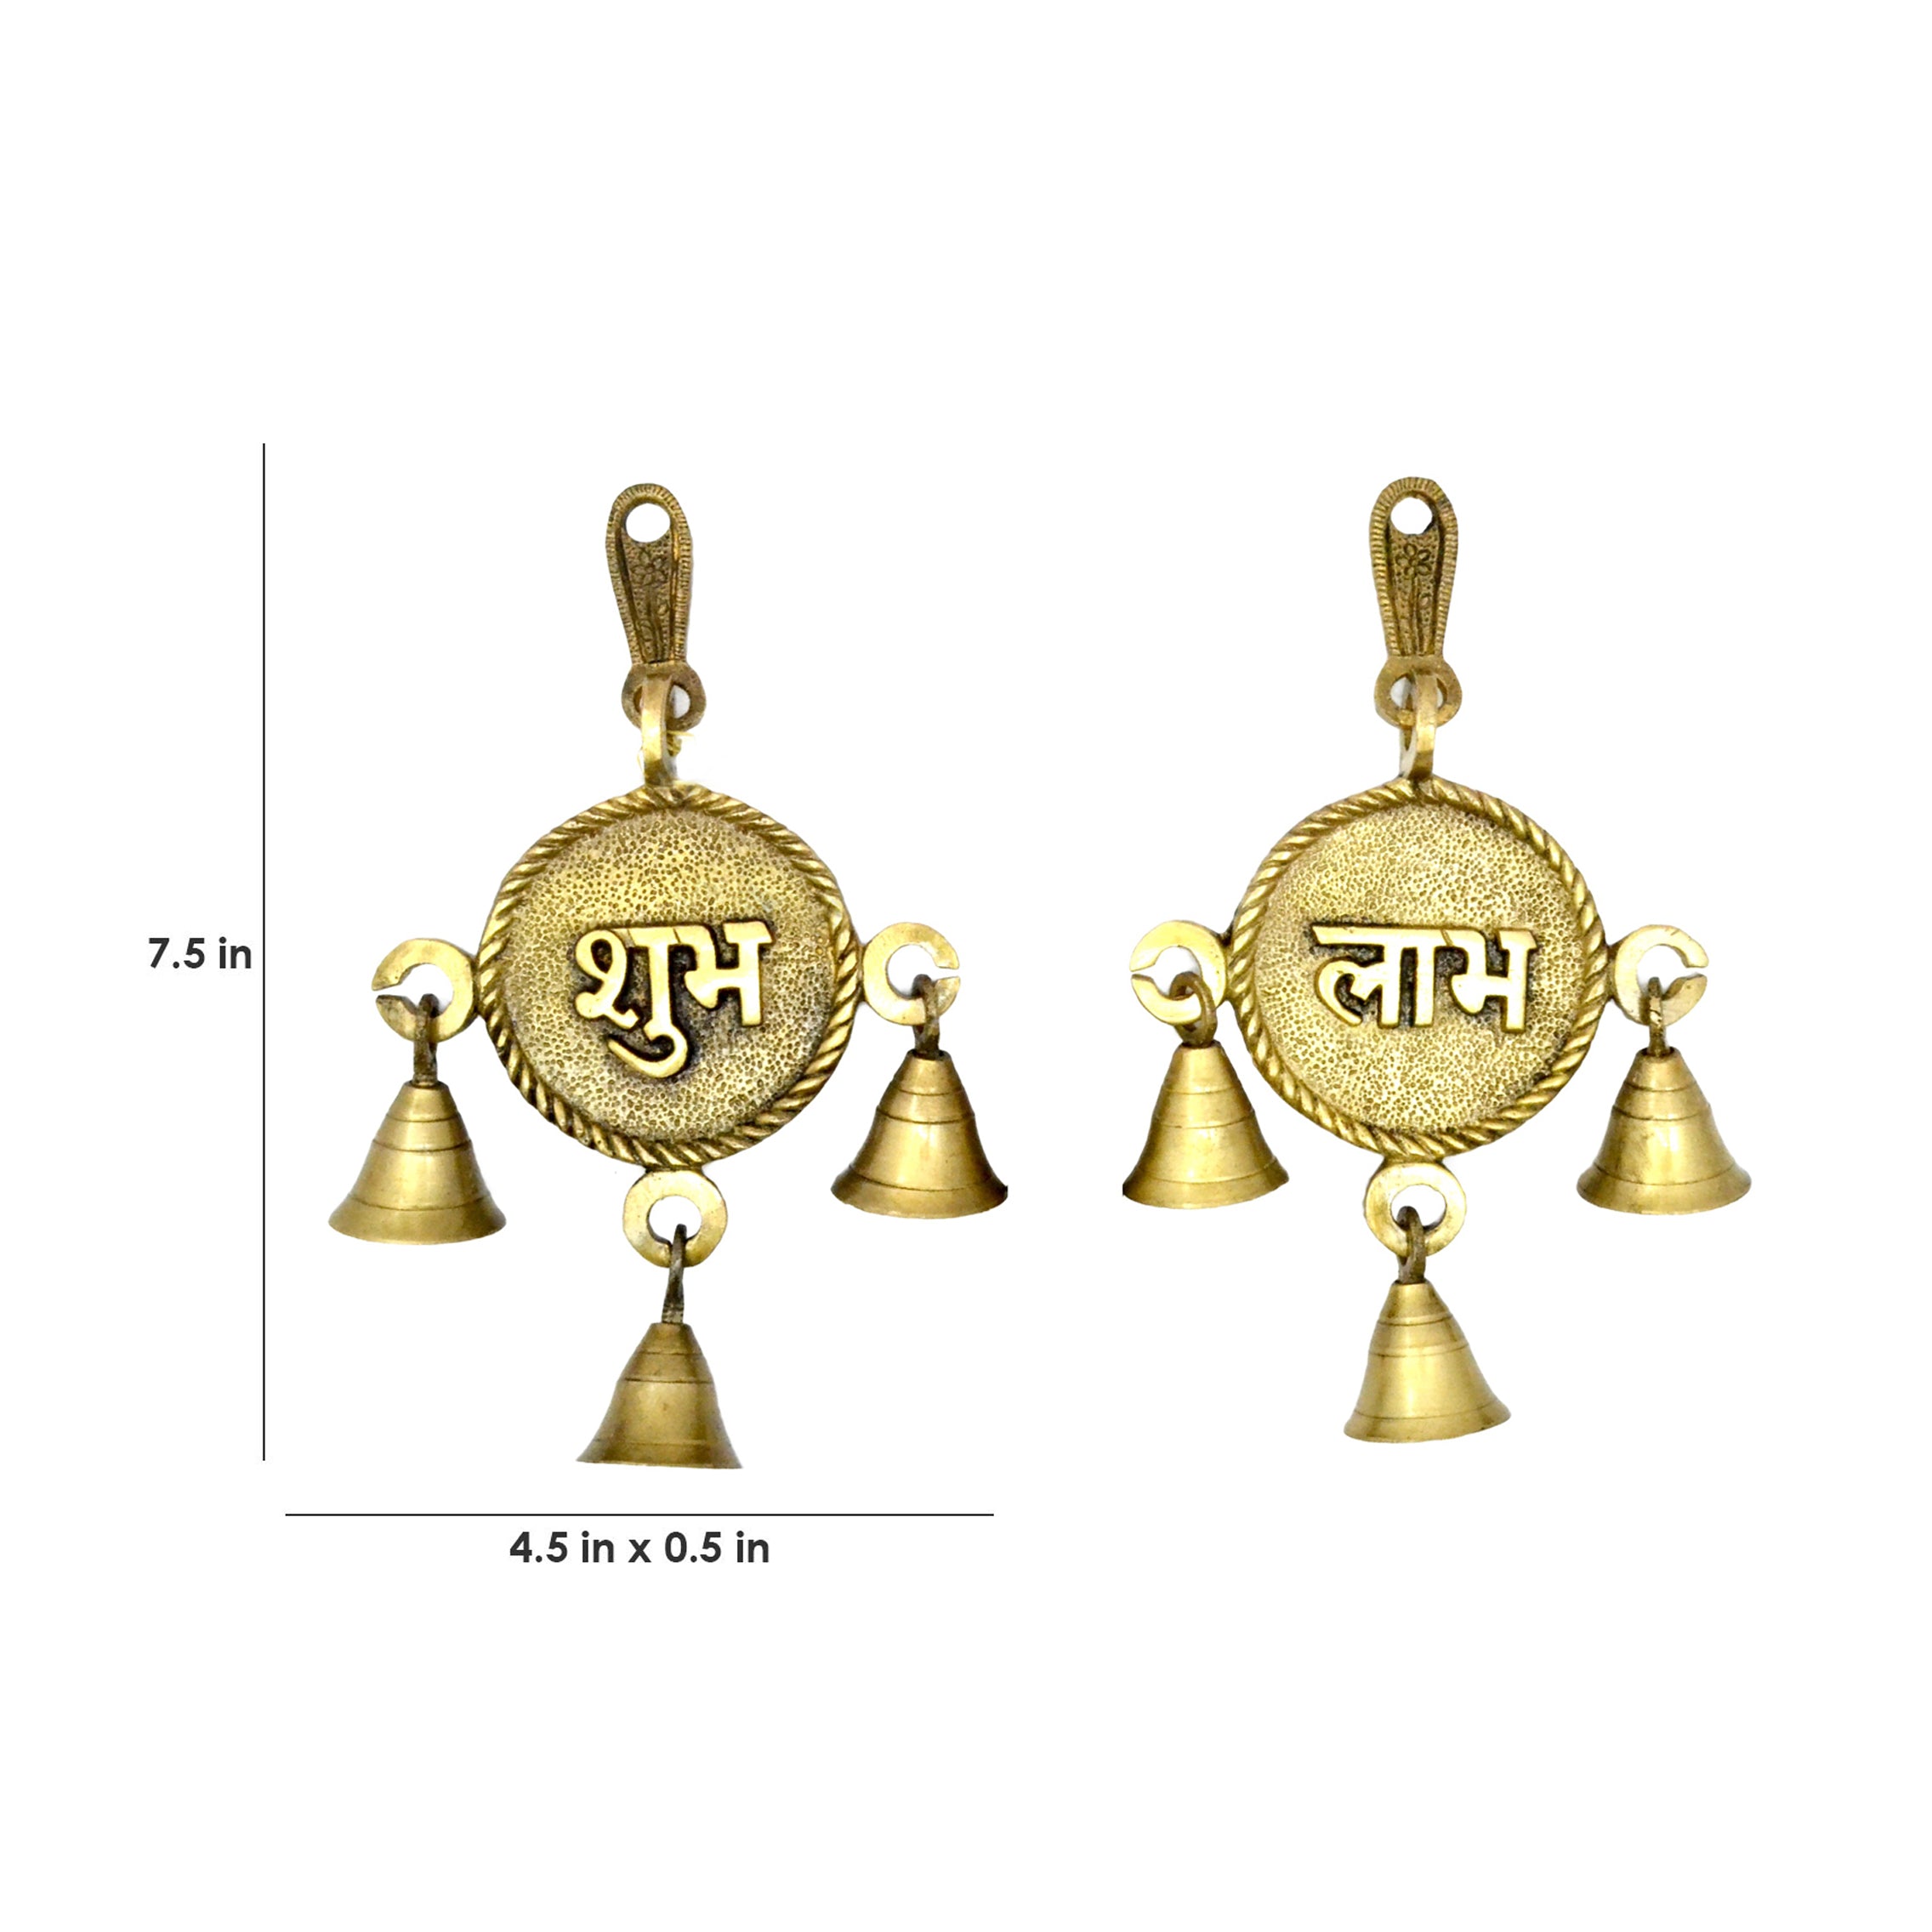 Brass Rounded Shubh Labh Door Hanging Bells Set, Hanging Bells for Home Decor